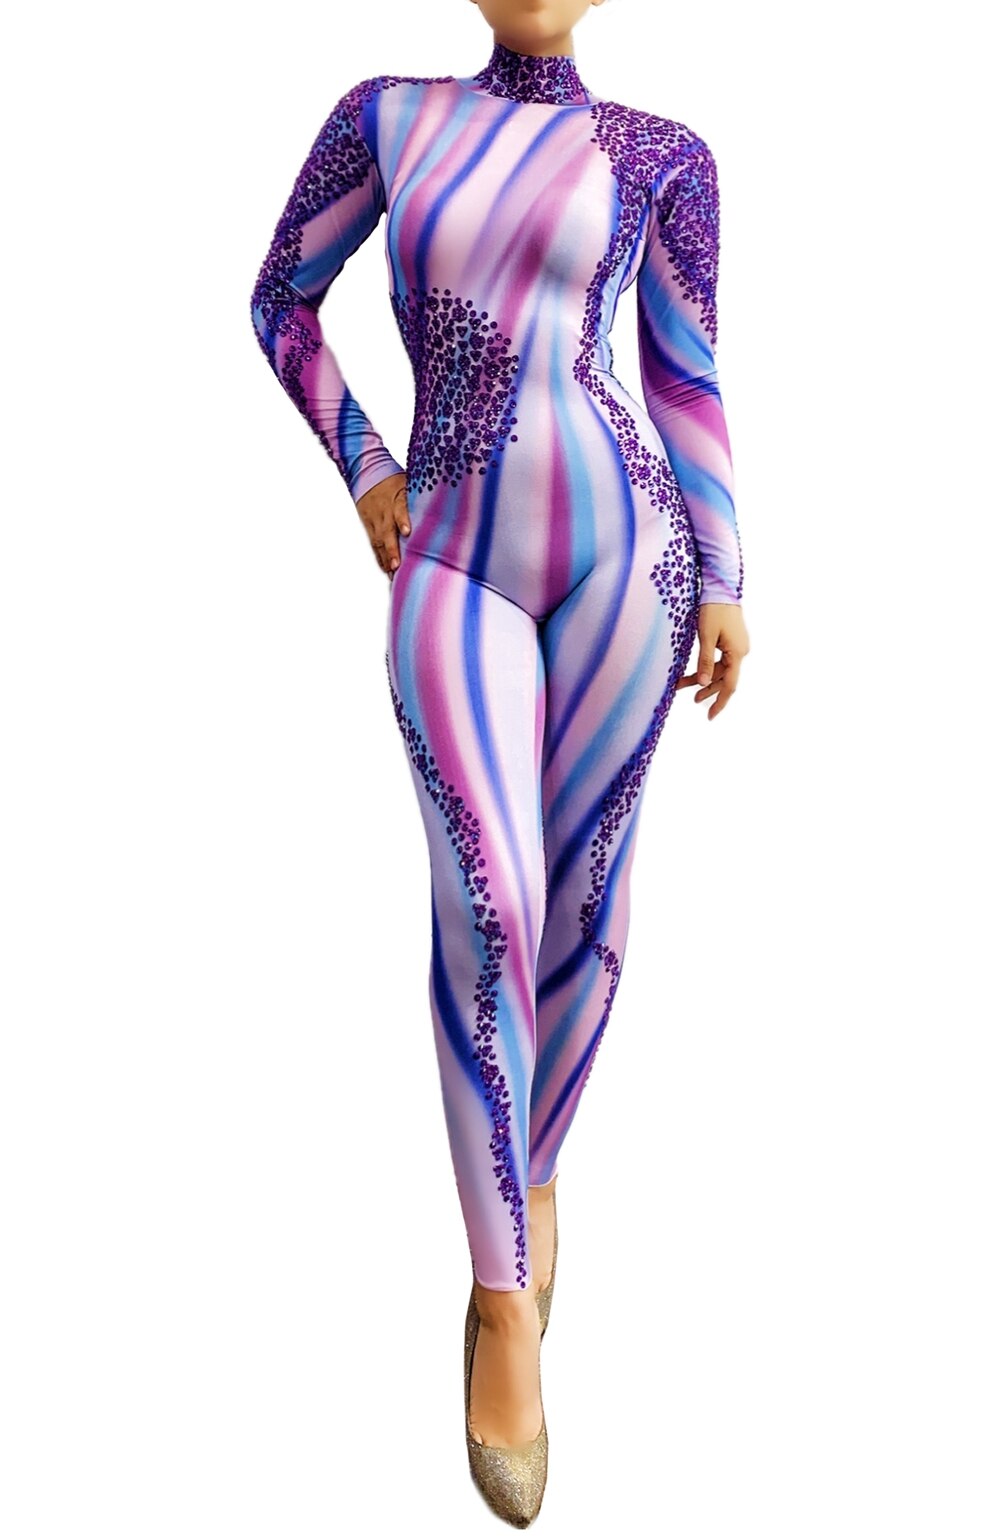 Sparkly Purple Rhinestones Jumpsuit Women Party Birthday Outfits Dance Leotard Leggings Sexy Performance Show Stage Wear